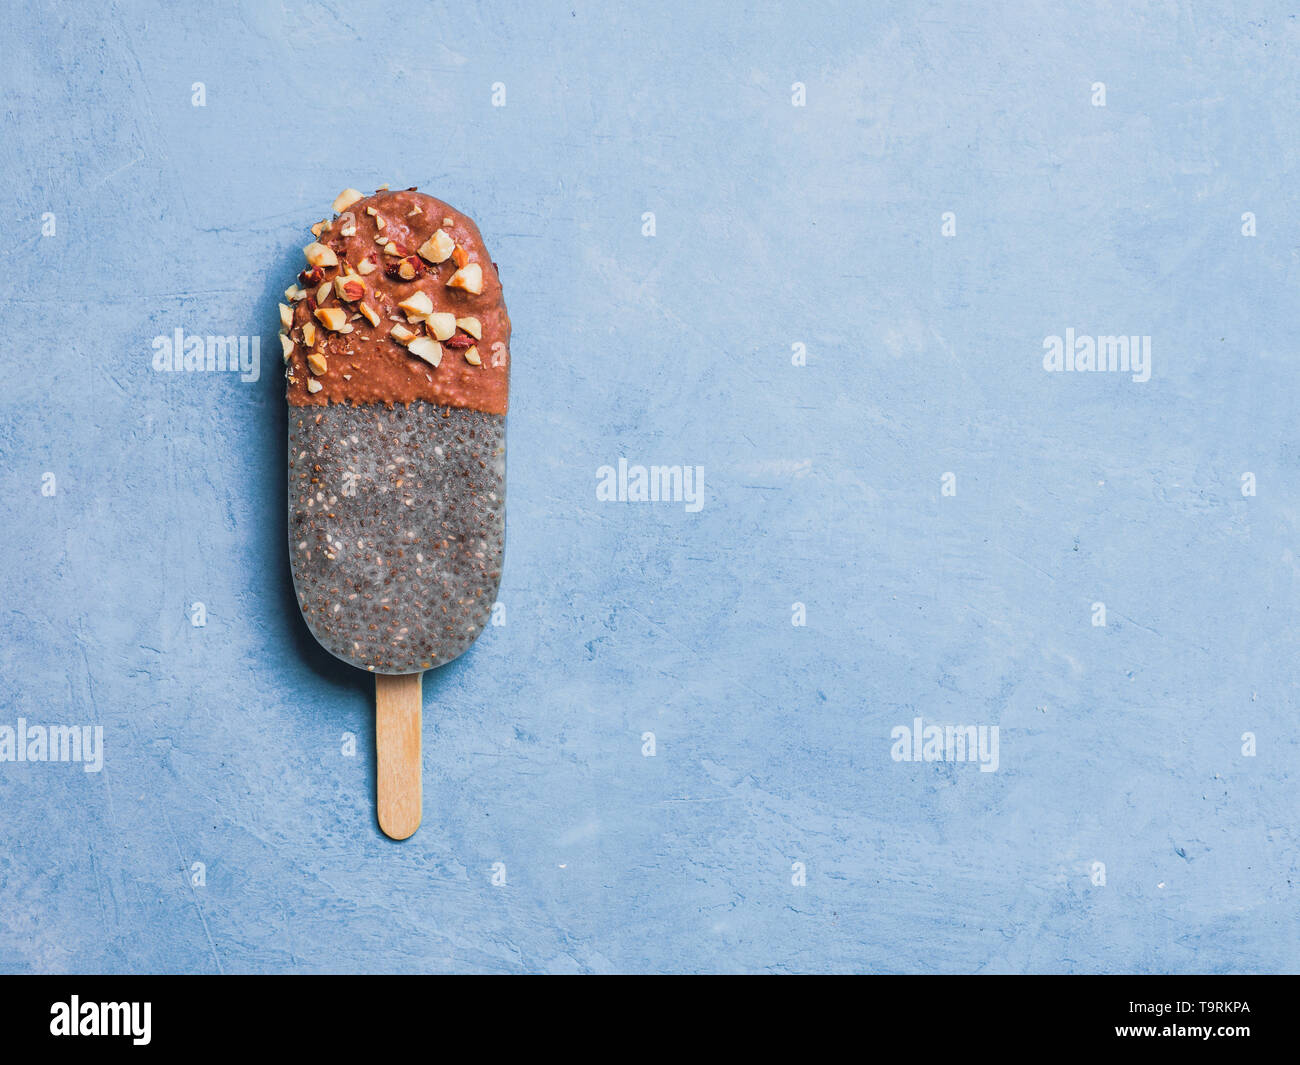 Chia popsicle with chocolate and nuts on blue background. Healthy recipe and idea homemade vegan popsicle ice cream. Easter dessert idea. Copy space for text. Top view or flat-lay. Stock Photo